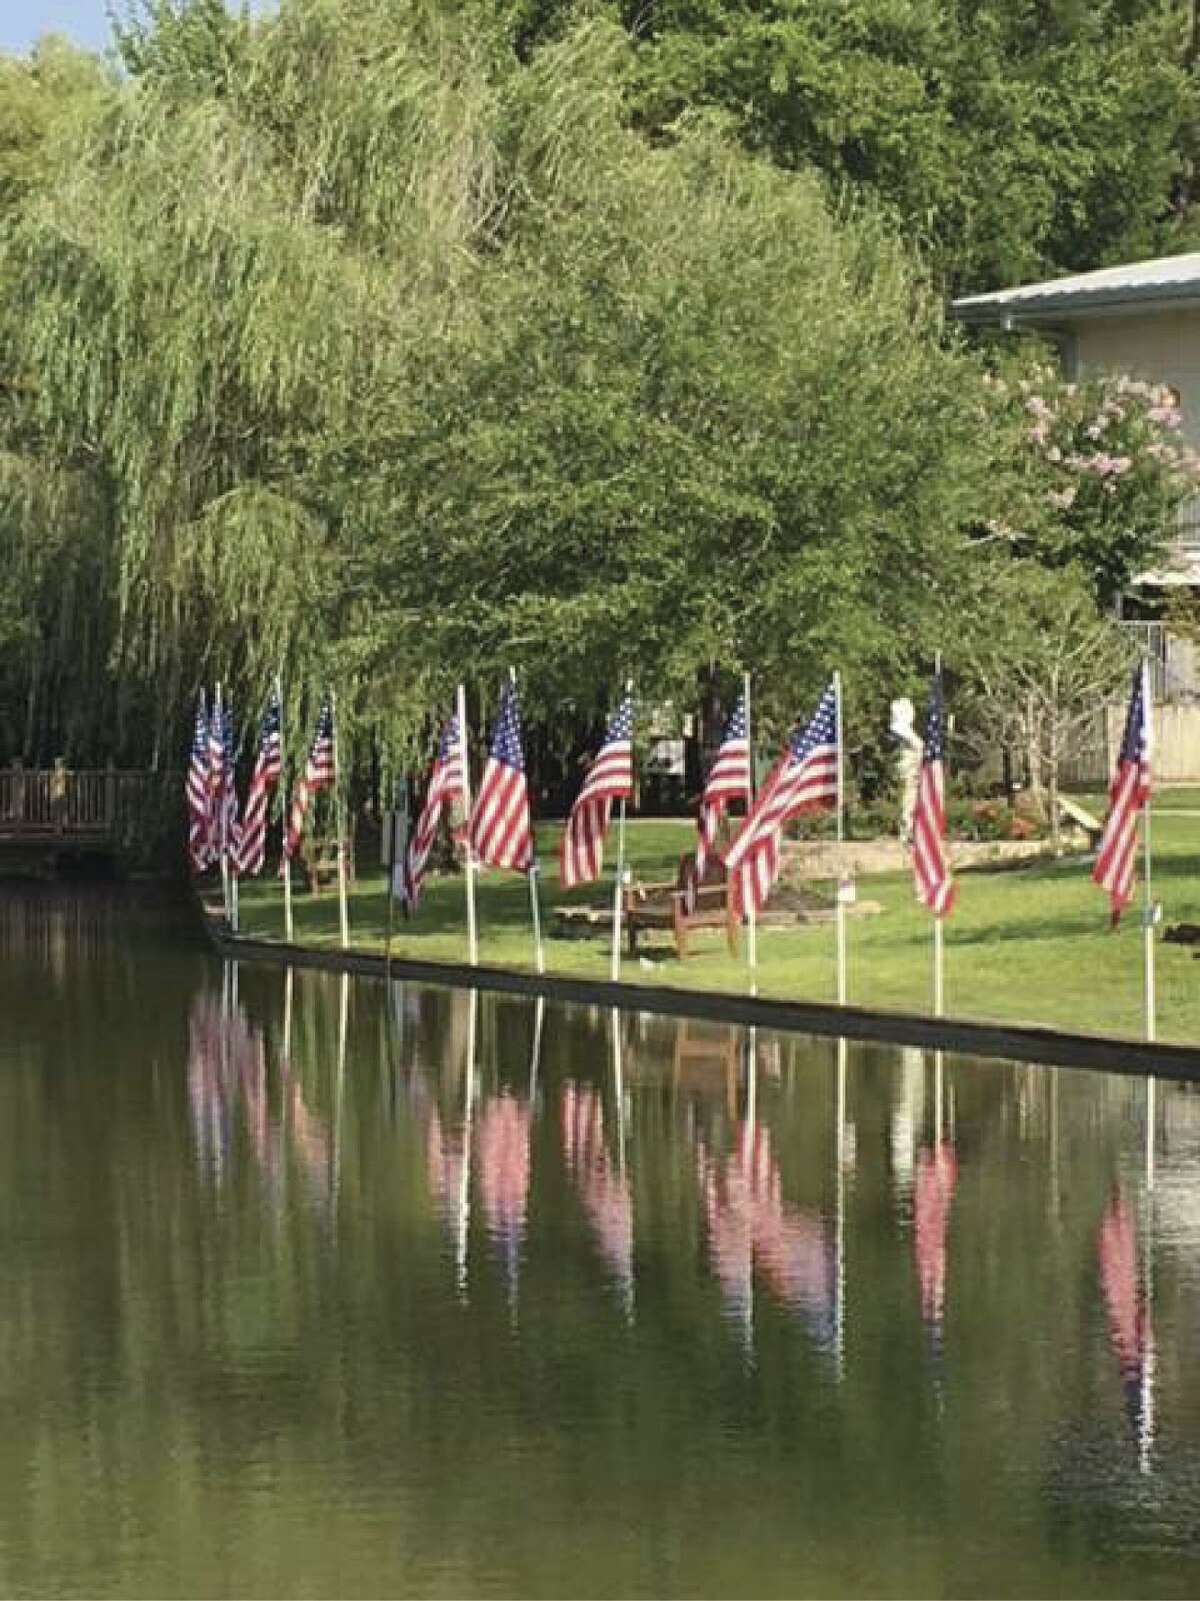 Flags surround the pond at Memory Park for the 4th of July holiday.